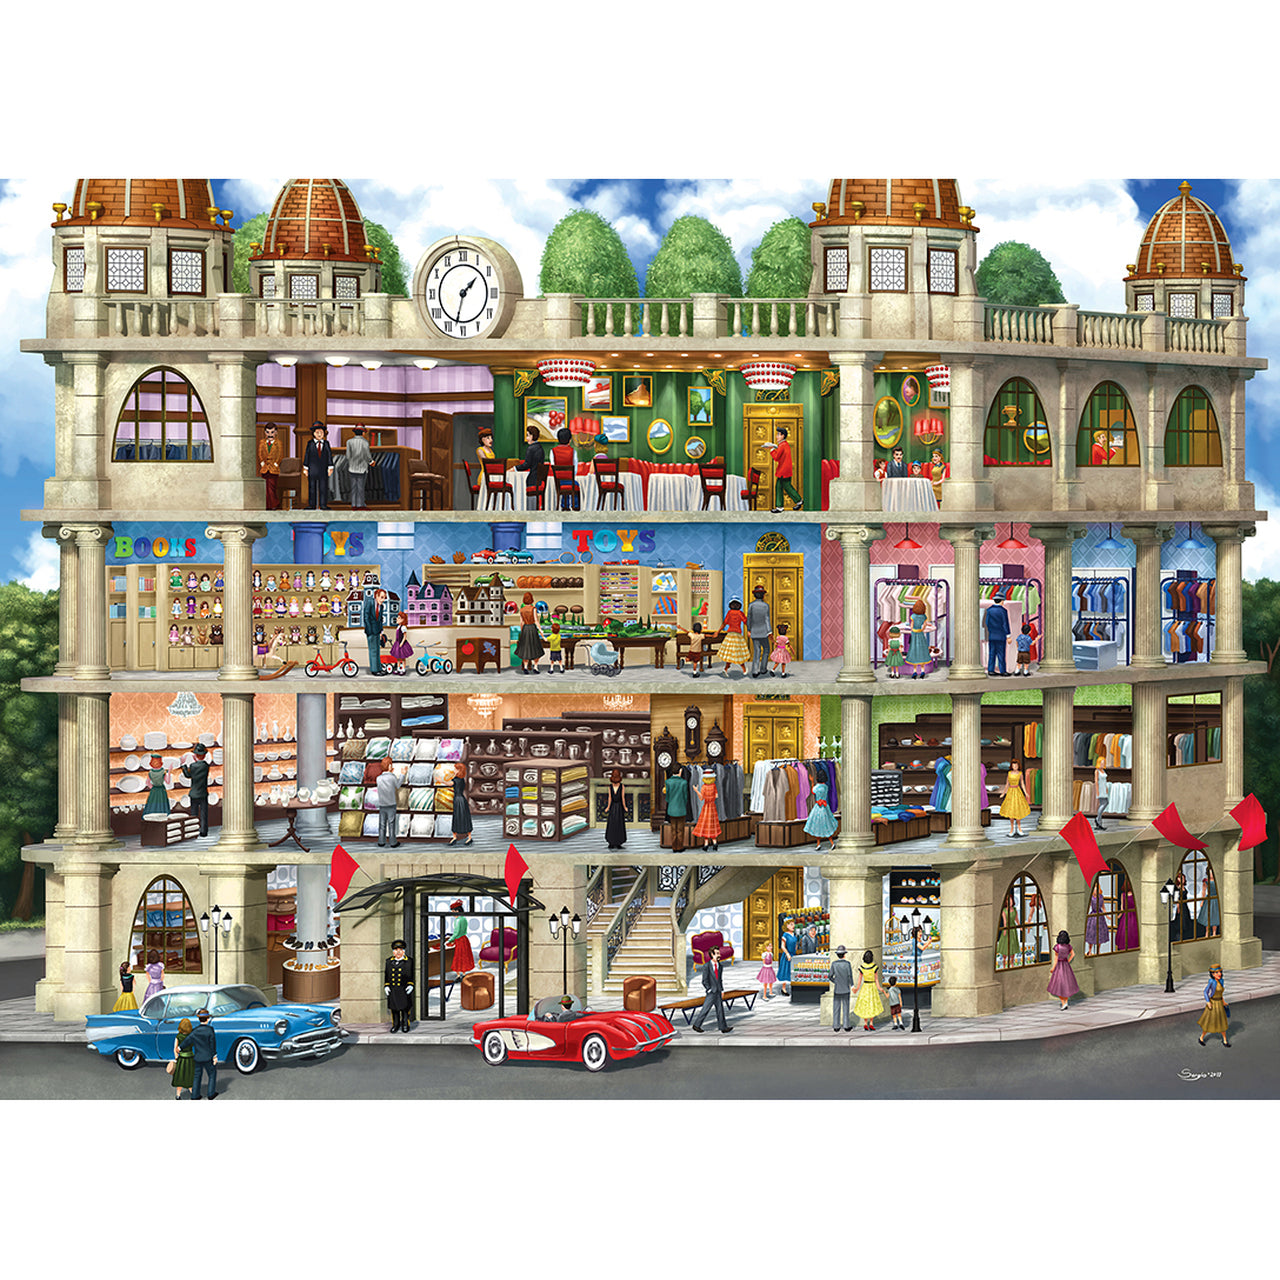 Inside Out Fields Department Store - 1000 Piece Jigsaw Puzzle by Masterpieces